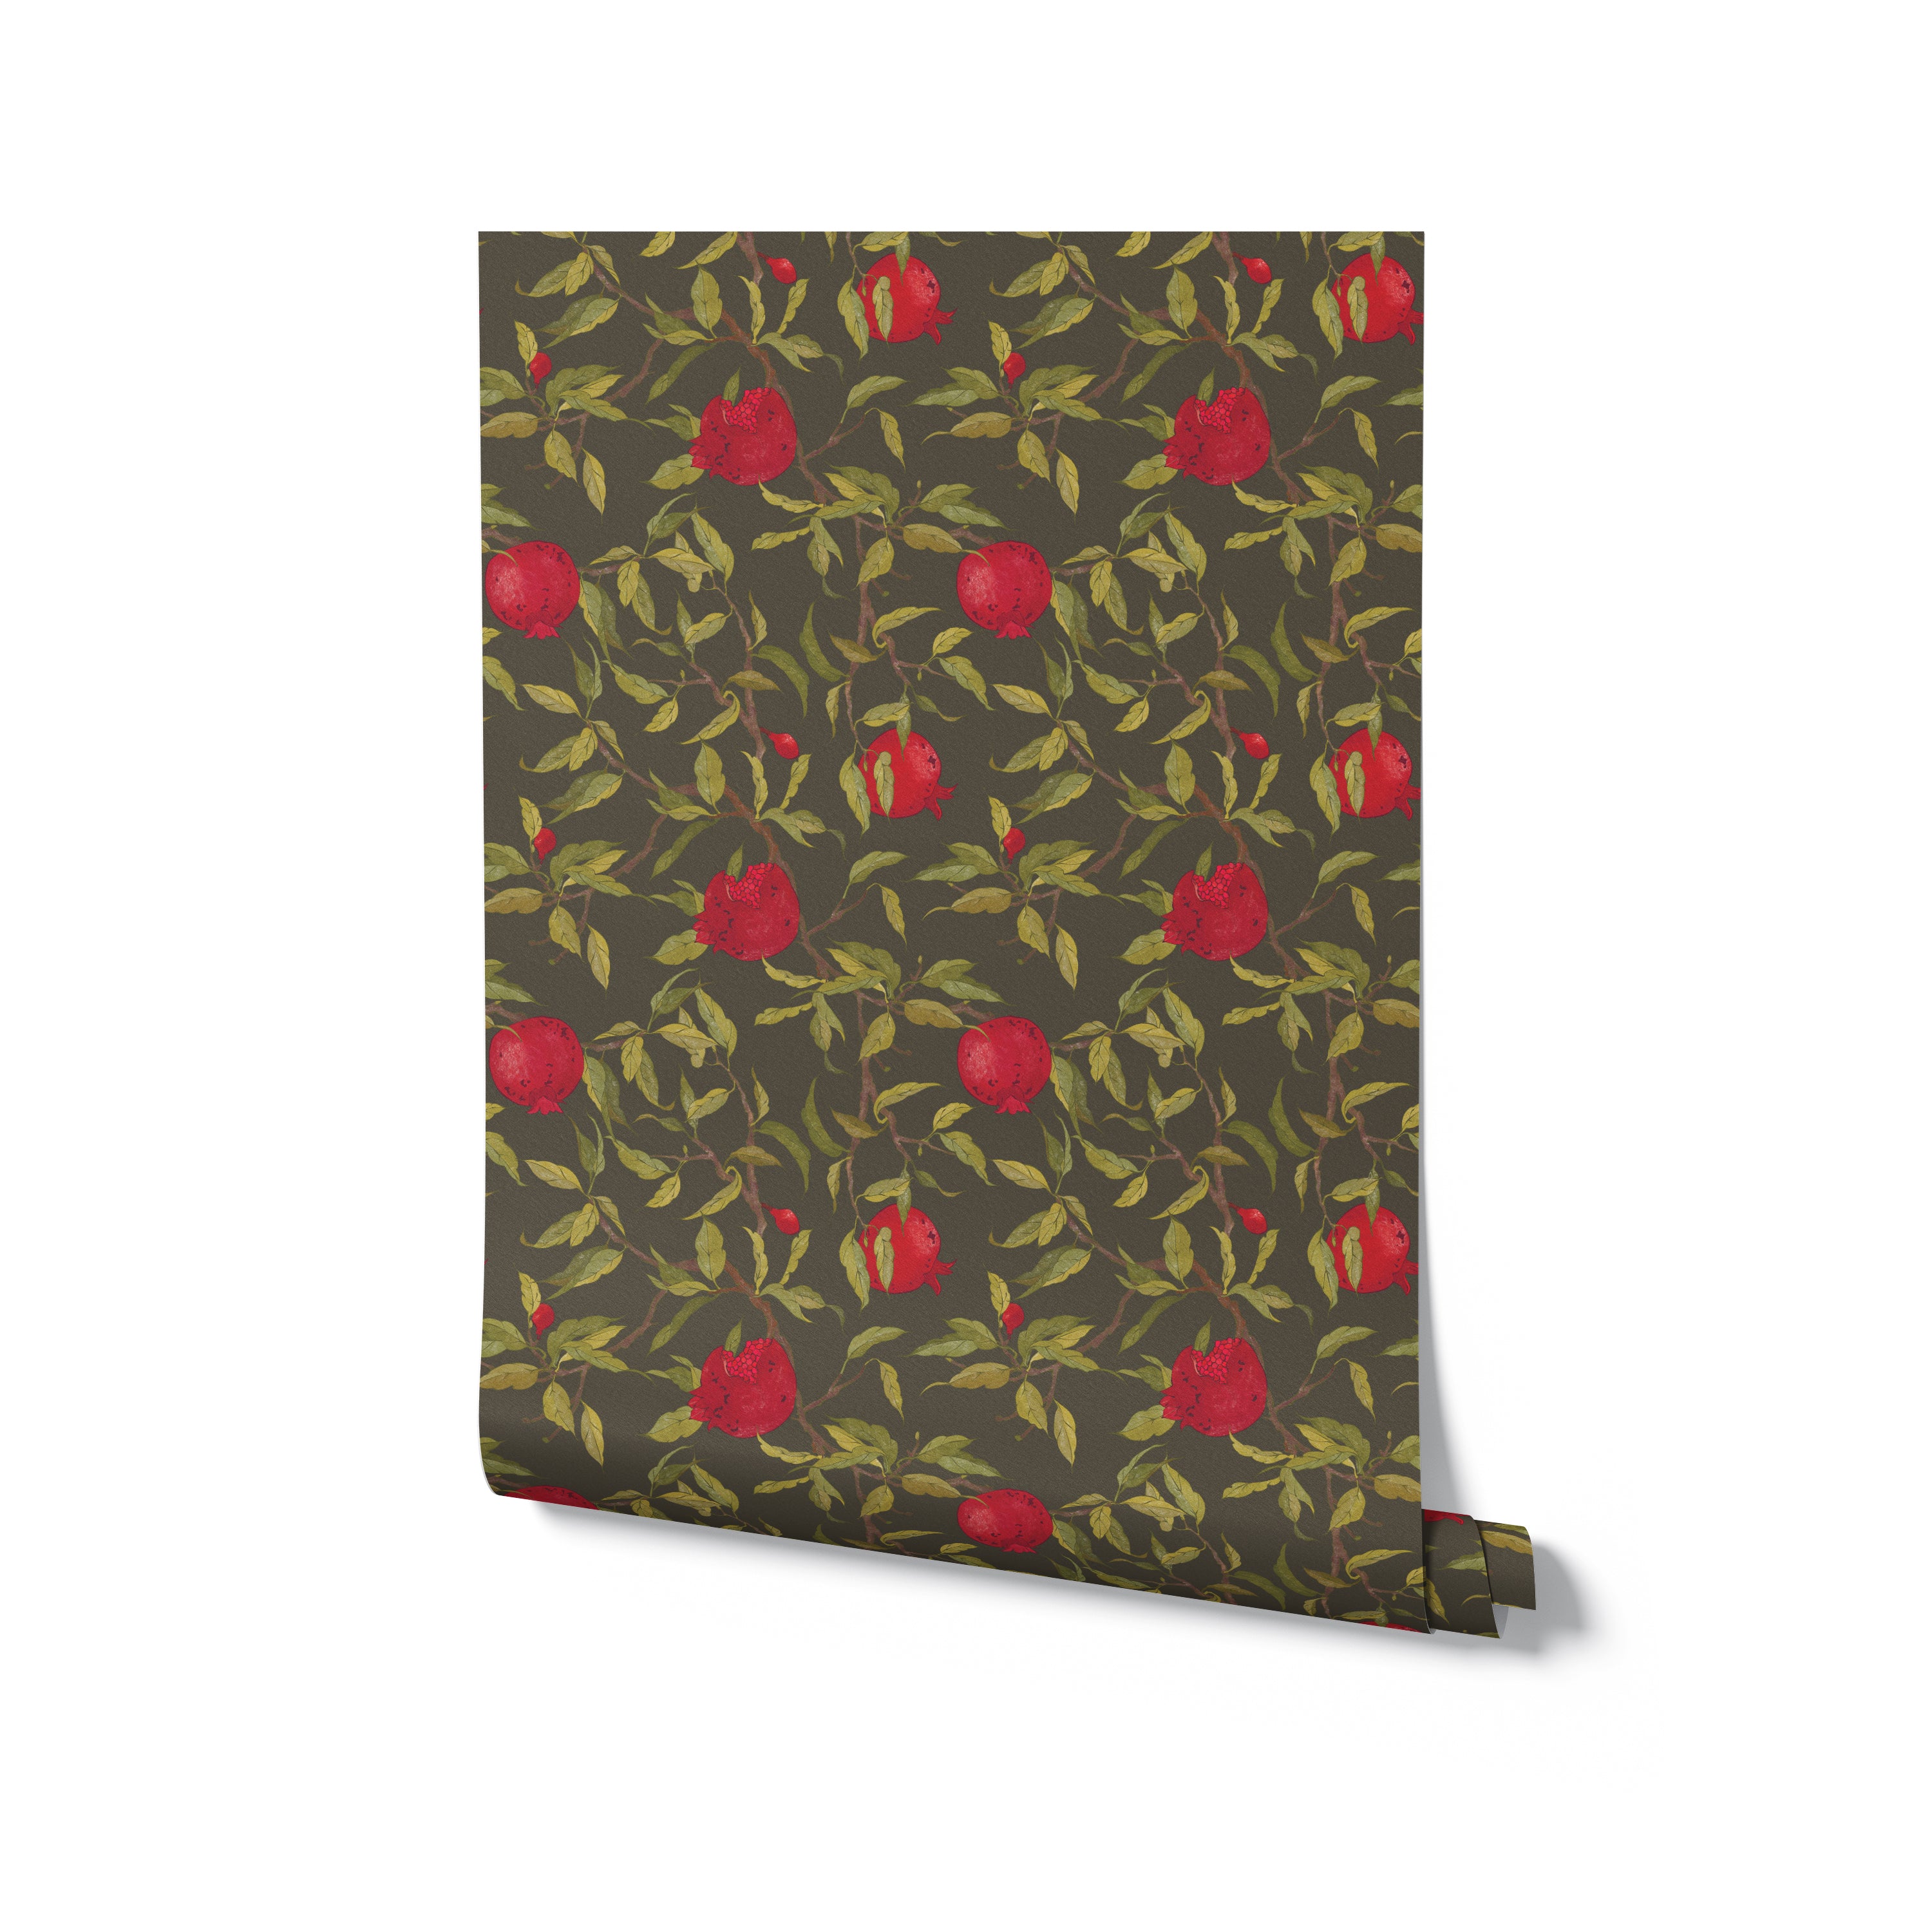 A rolled-up piece of Vintage Pomegranate Wallpaper against a plain background, showcasing the intricate design of dark red pomegranates intertwined with green foliage, perfect for adding a vintage charm to any interior.